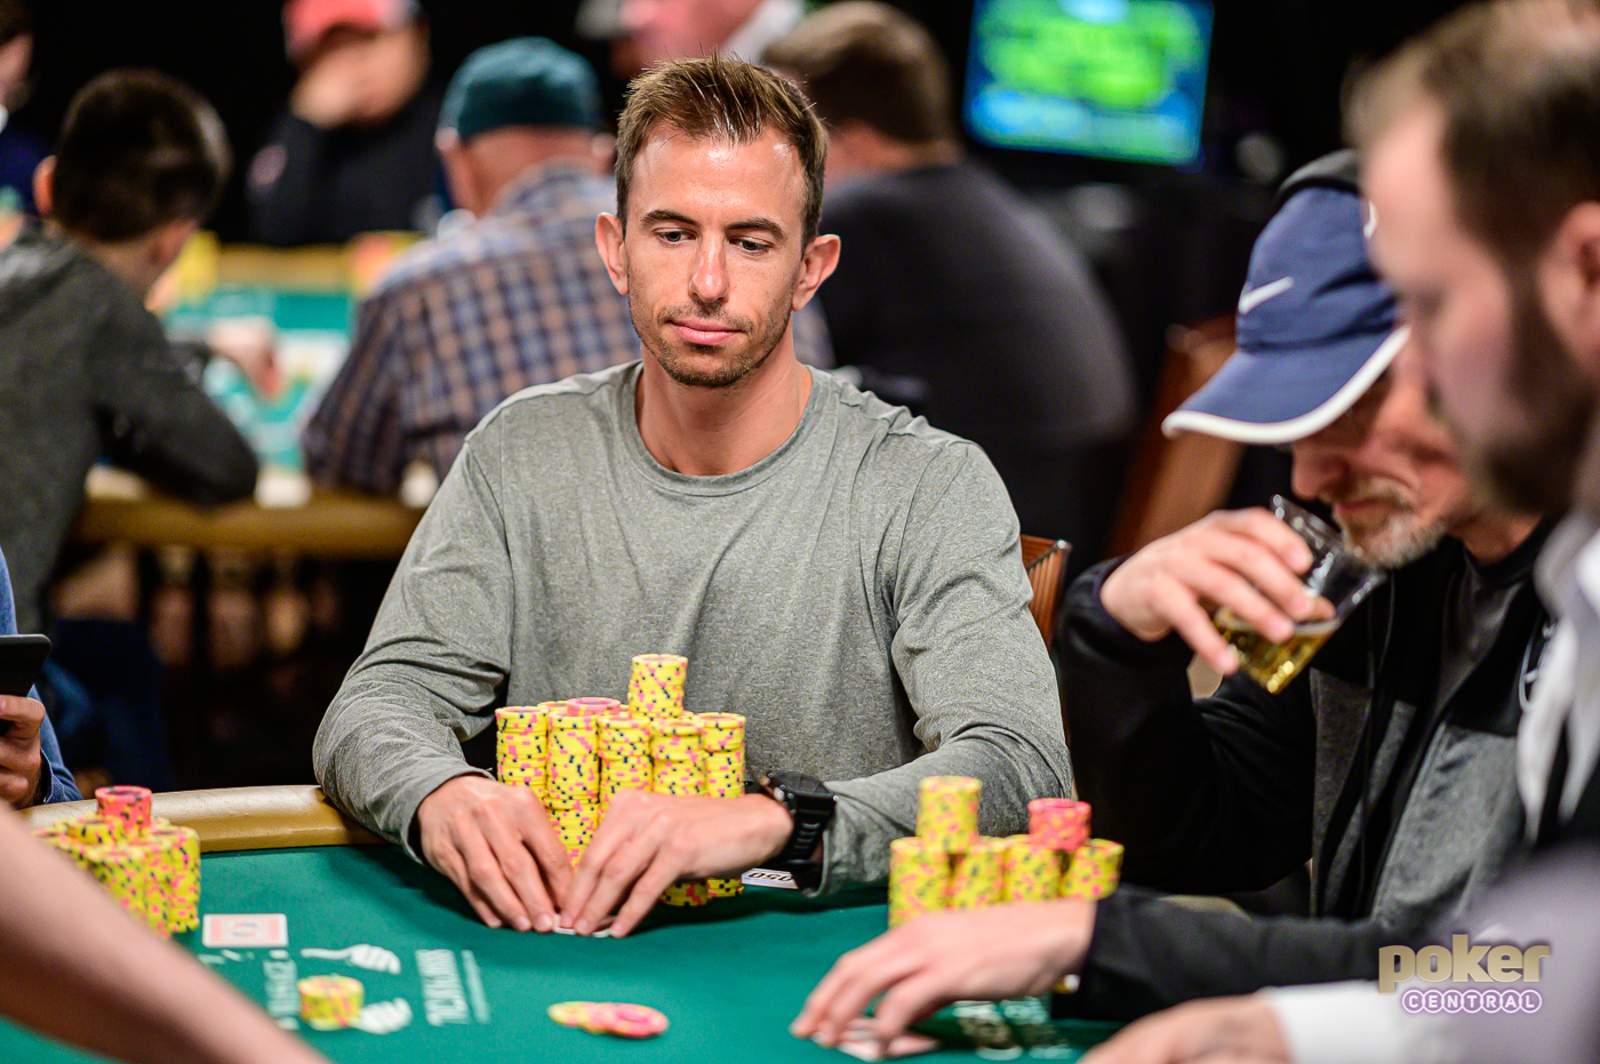 Massive Lead for Shorr in $5k, Niall Farrell Proposes Poker Purge and Norman Chad Explains WSOP Lingo